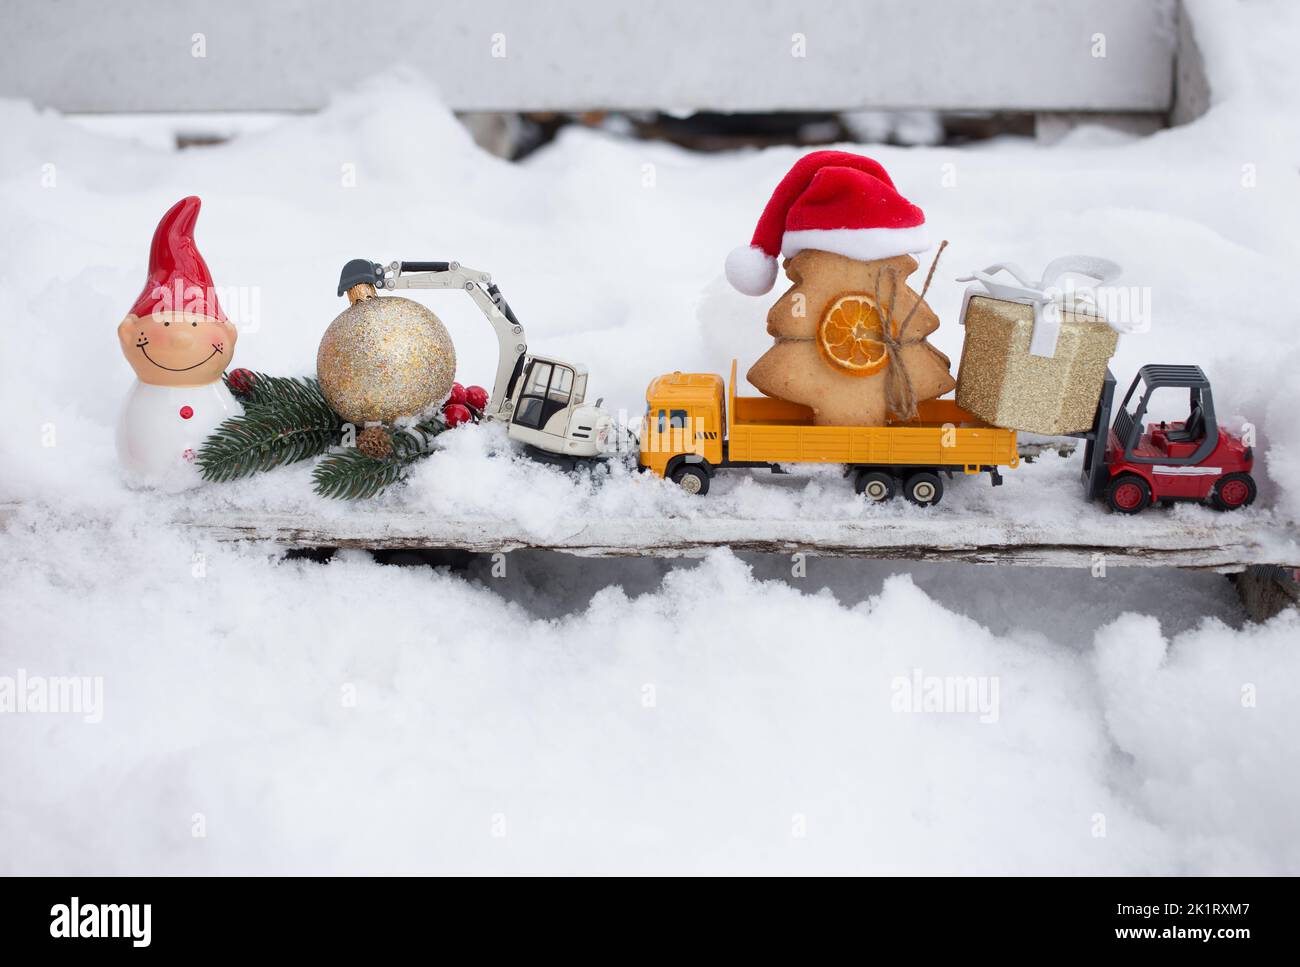 model of toy metal excavator, truck loaded with gingerbread tree, decorative Santa's helper snowman, warehouse loader standing on snow. concept of Chr Stock Photo